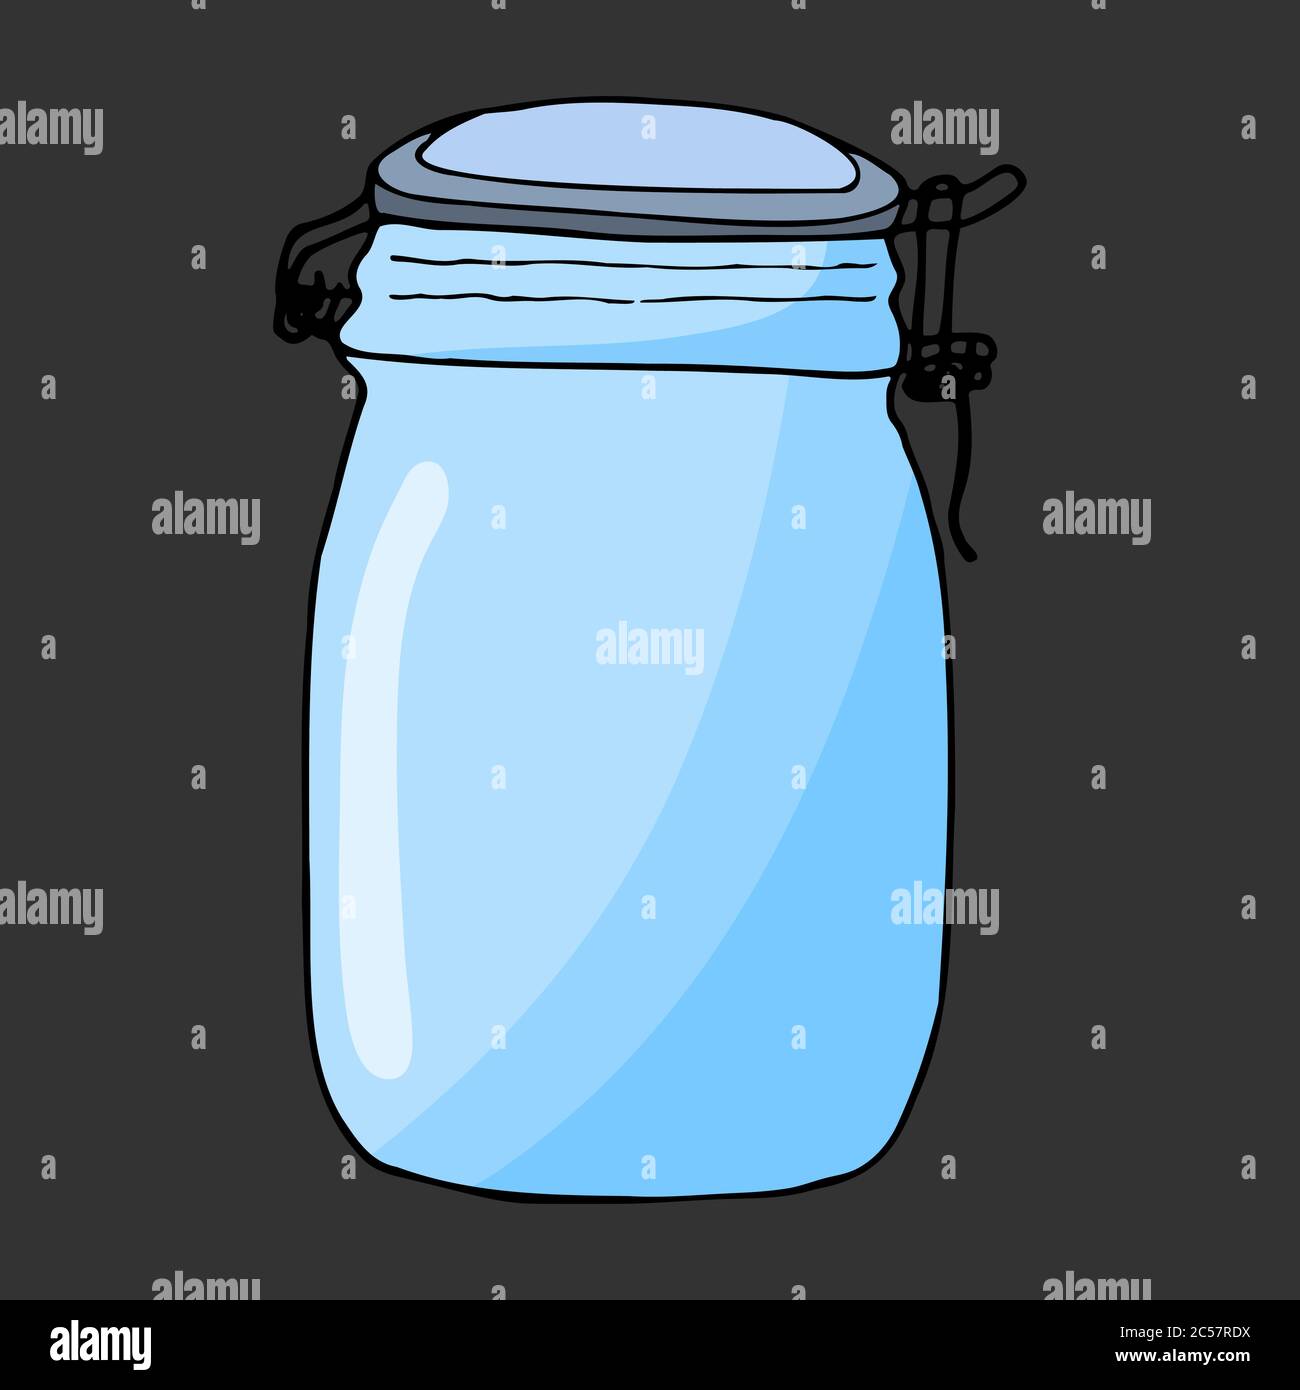 Colorful hand drawn jar. Contour sketch. Cartoon kitchen objects doodle style. Vector illustration isolated on dark background. Alchemy and vintage. Stock Vector